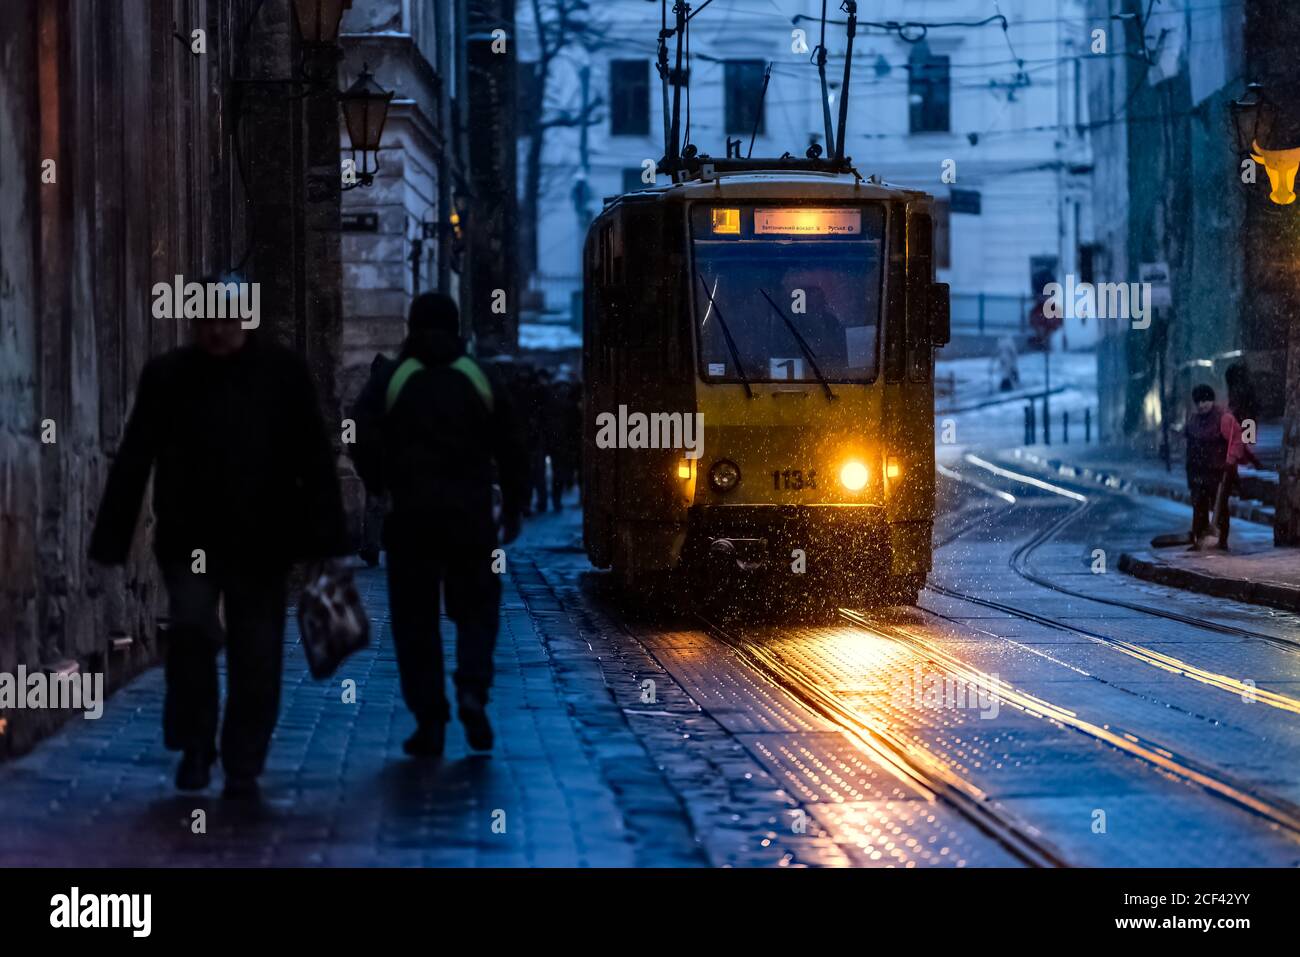 Lviv, Ukraine - December 28, 2019: Old town market square alley street in Lvov with winter snow at dark evening night and tram headlights illuminated Stock Photo